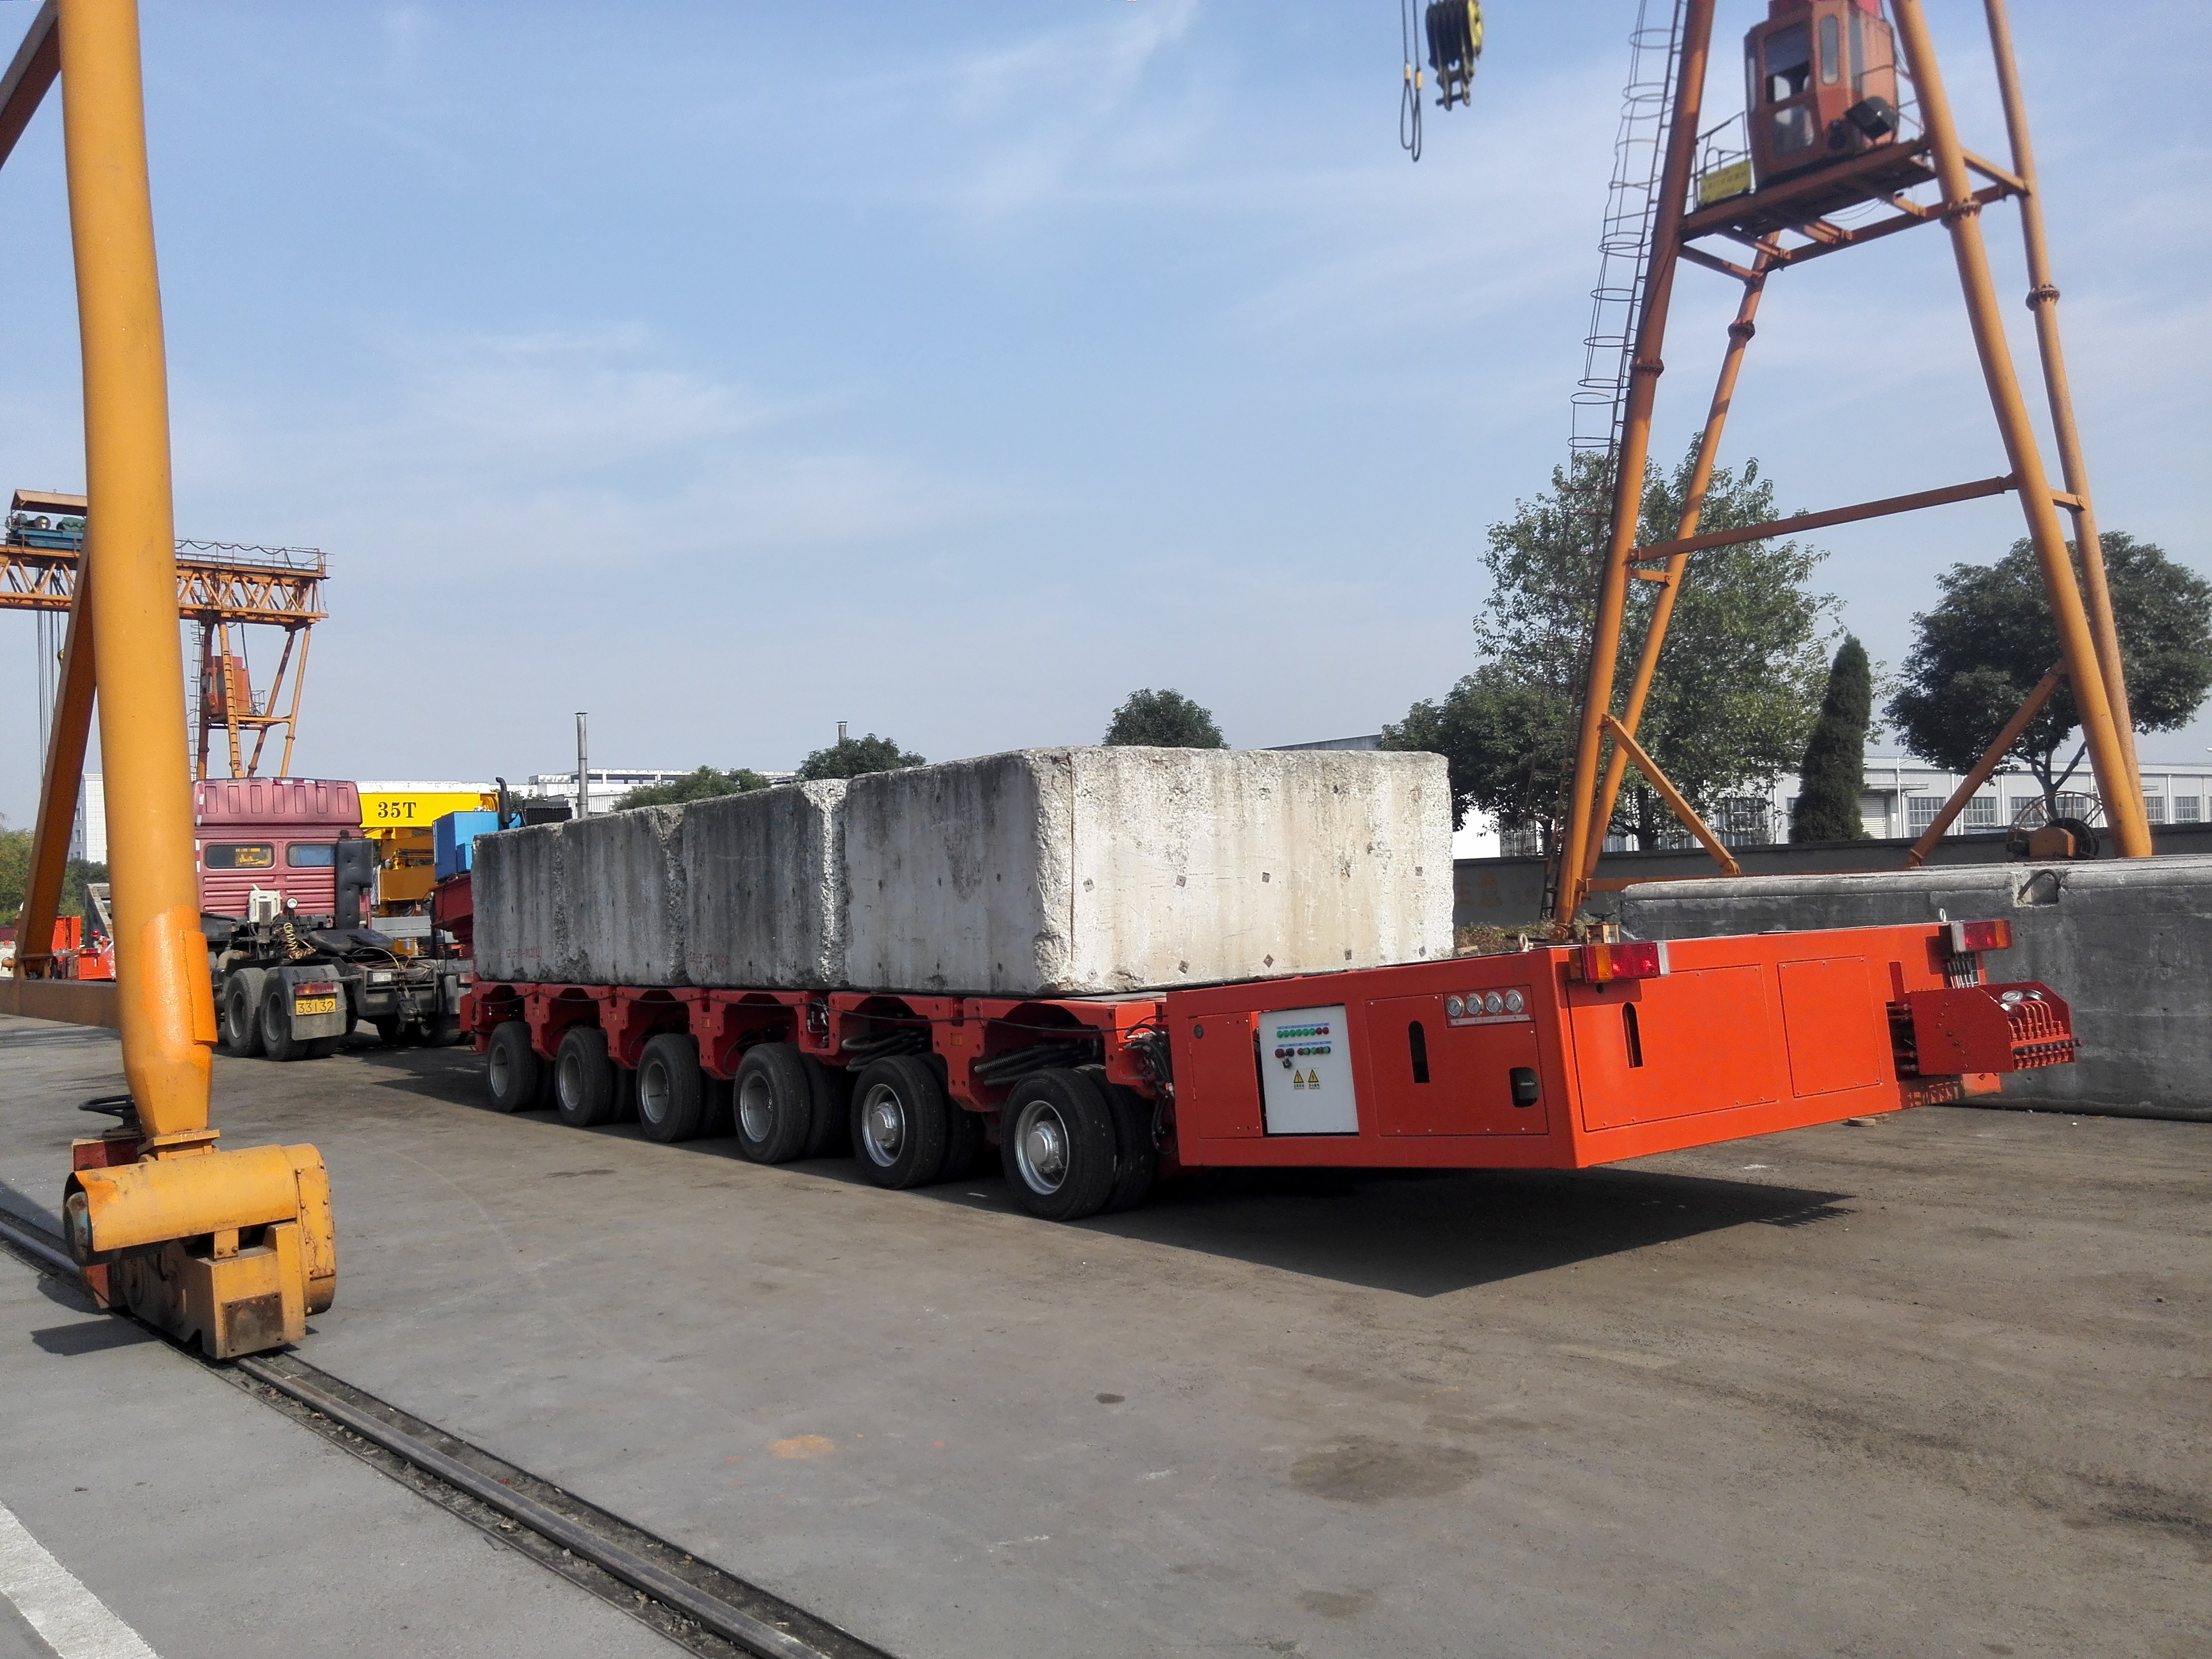 The-SPT-Self-propelled-trailer-is-in-loading-test